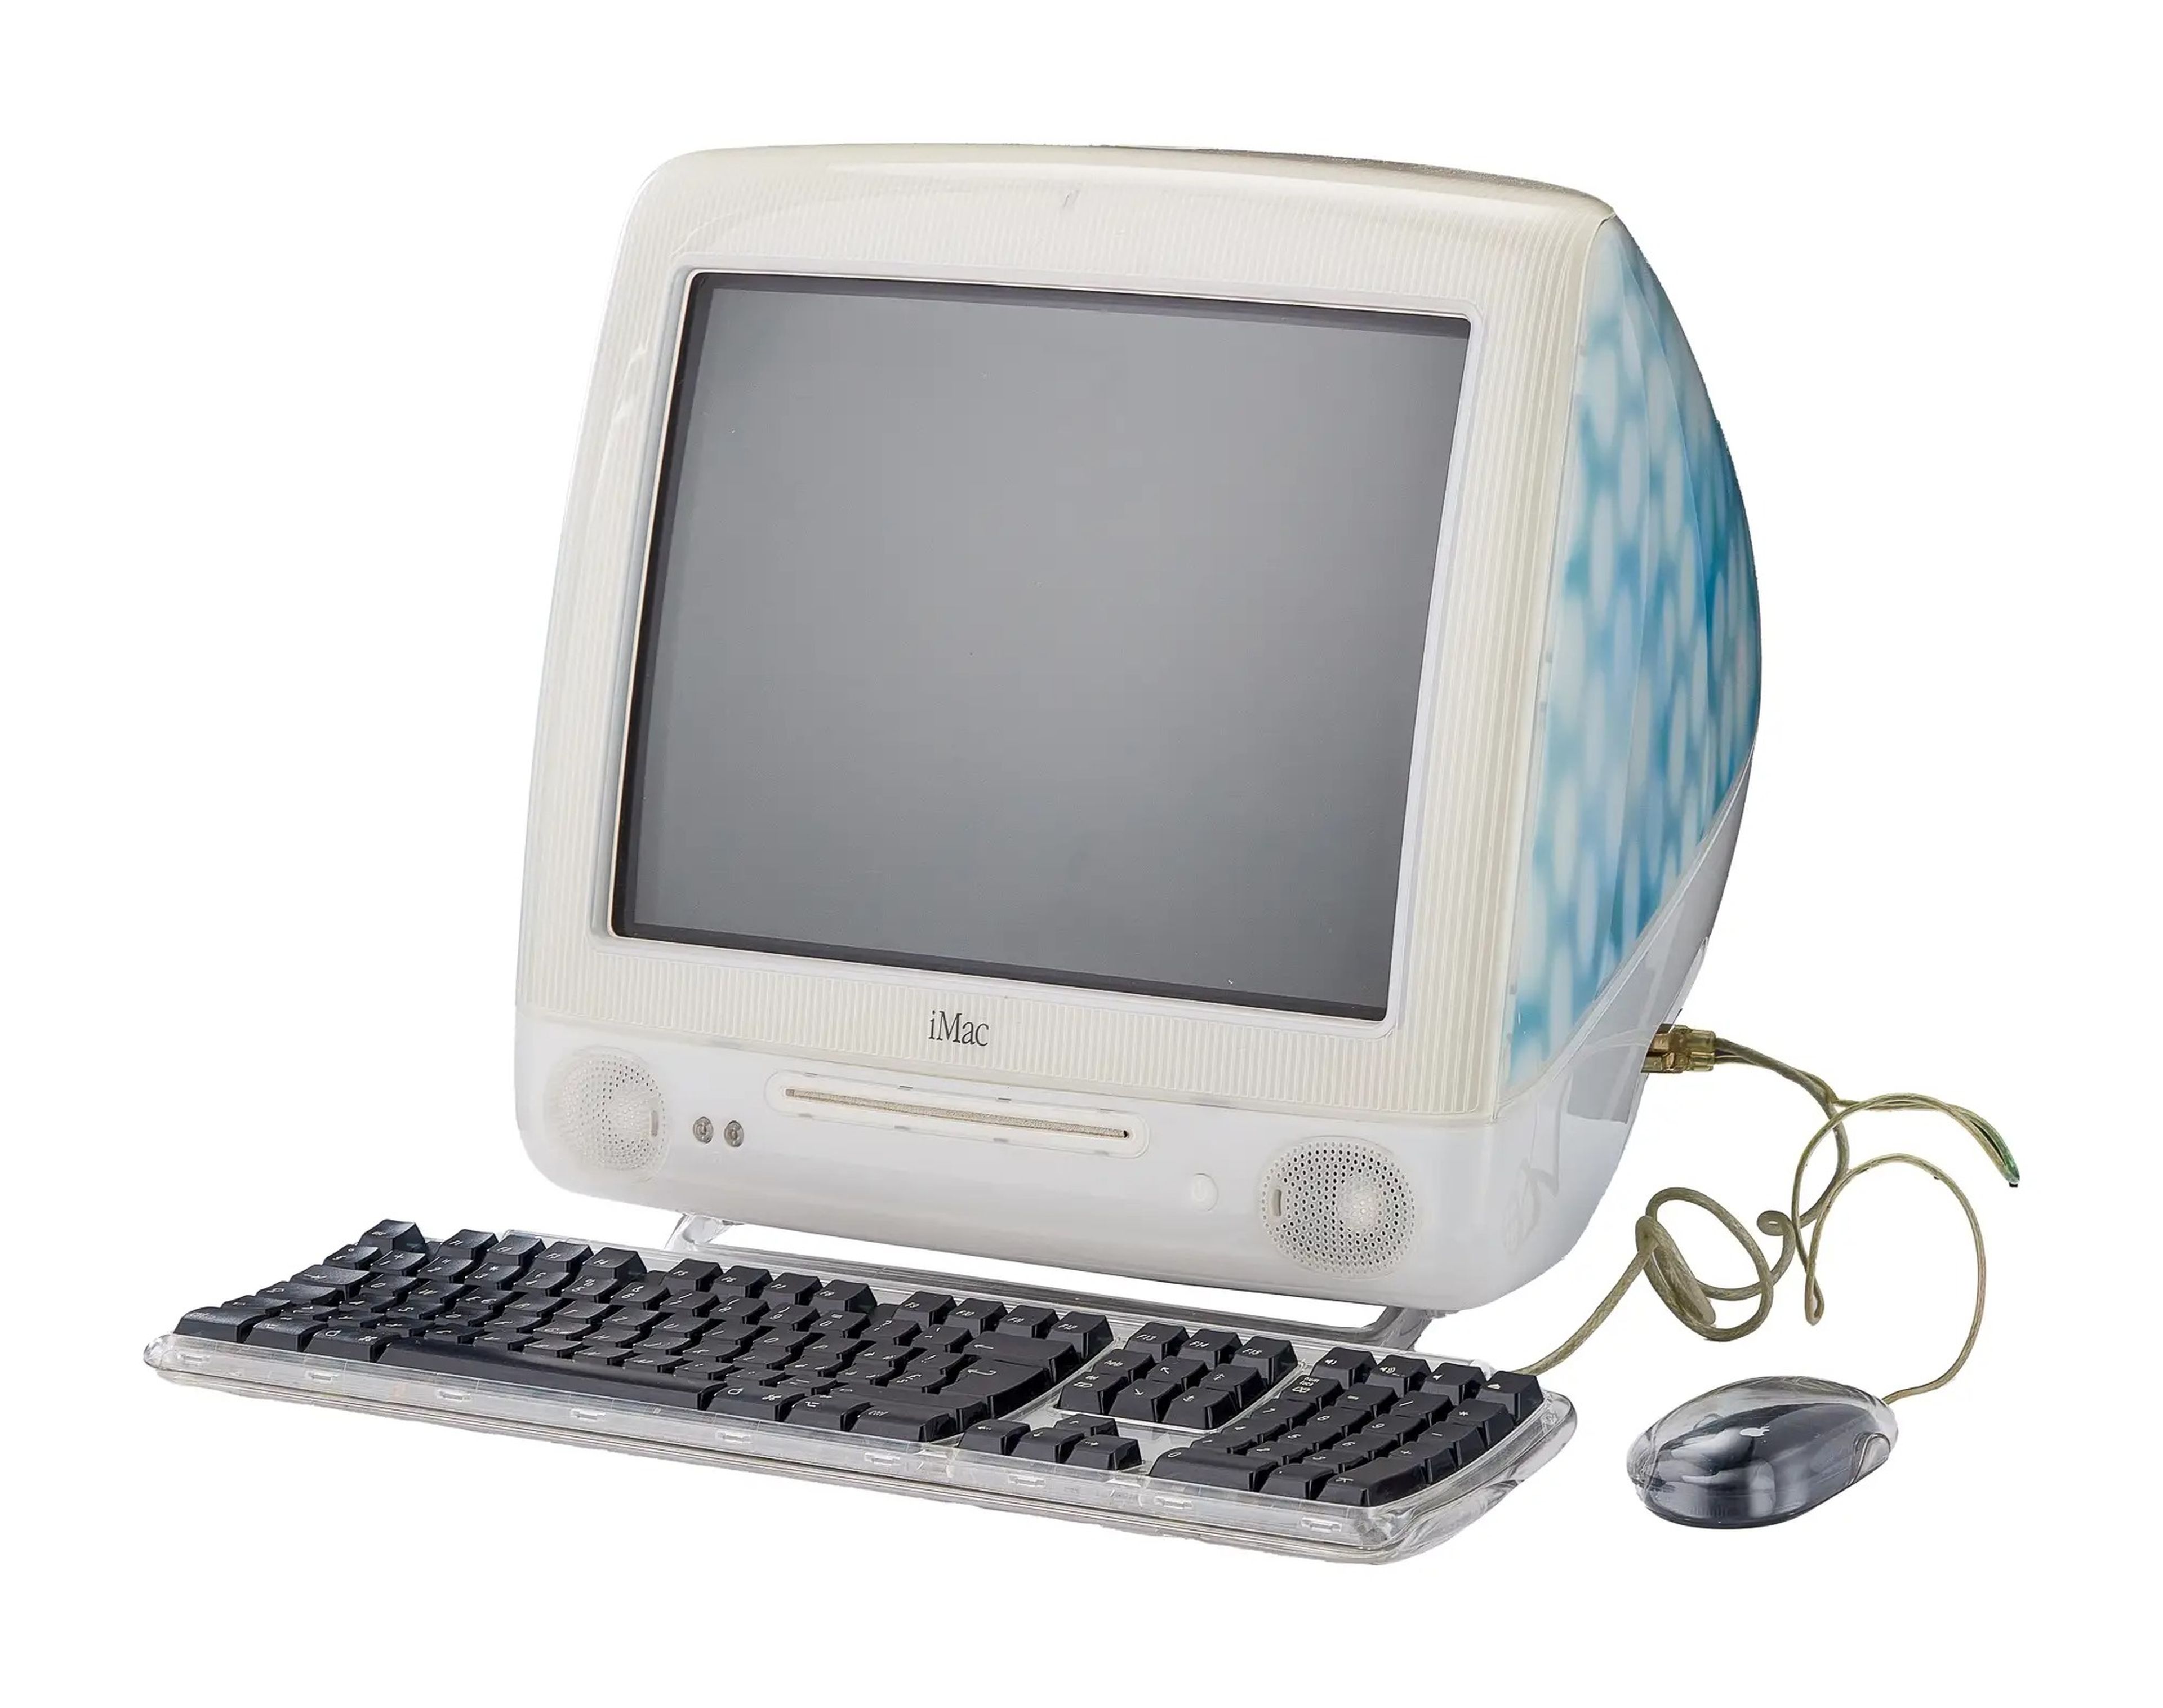 2001 iMac G3 with blue detailing, a keyboard, and mouse with wire